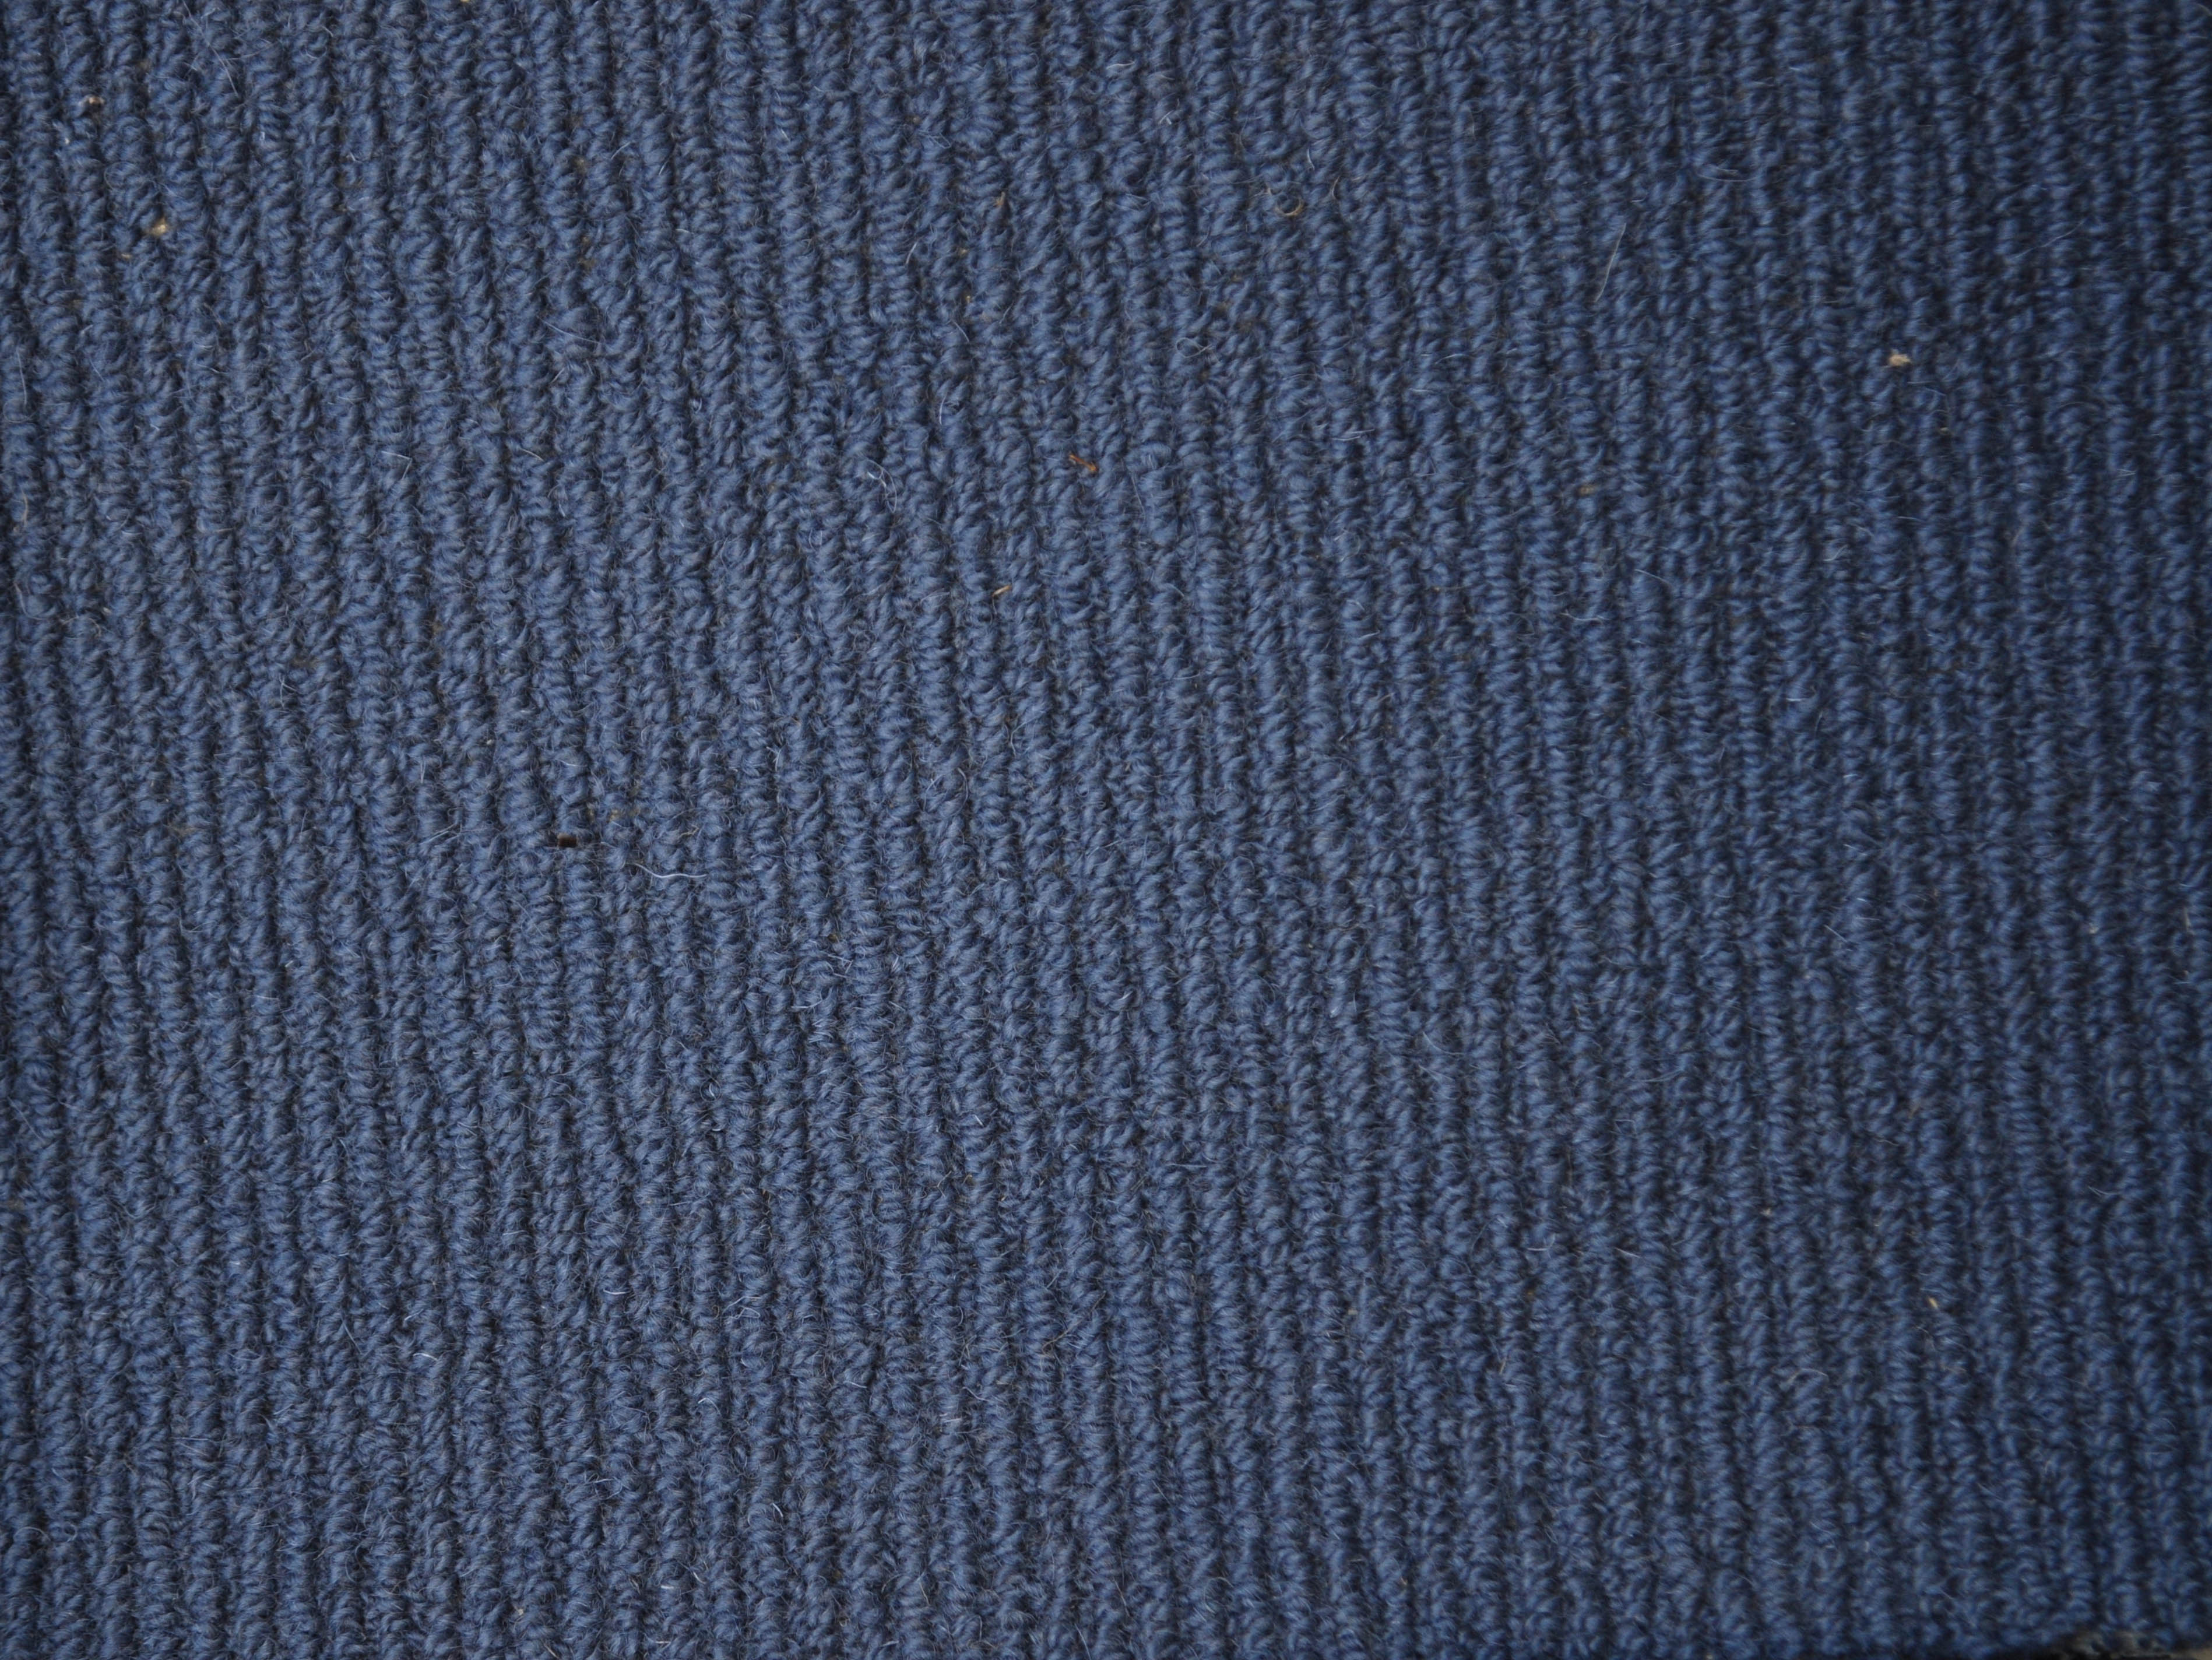  violet blue colored, 80% wool-20% nylon fibre, twist, level height pile, carpet called Andean Heights on sale at Concord Floors.